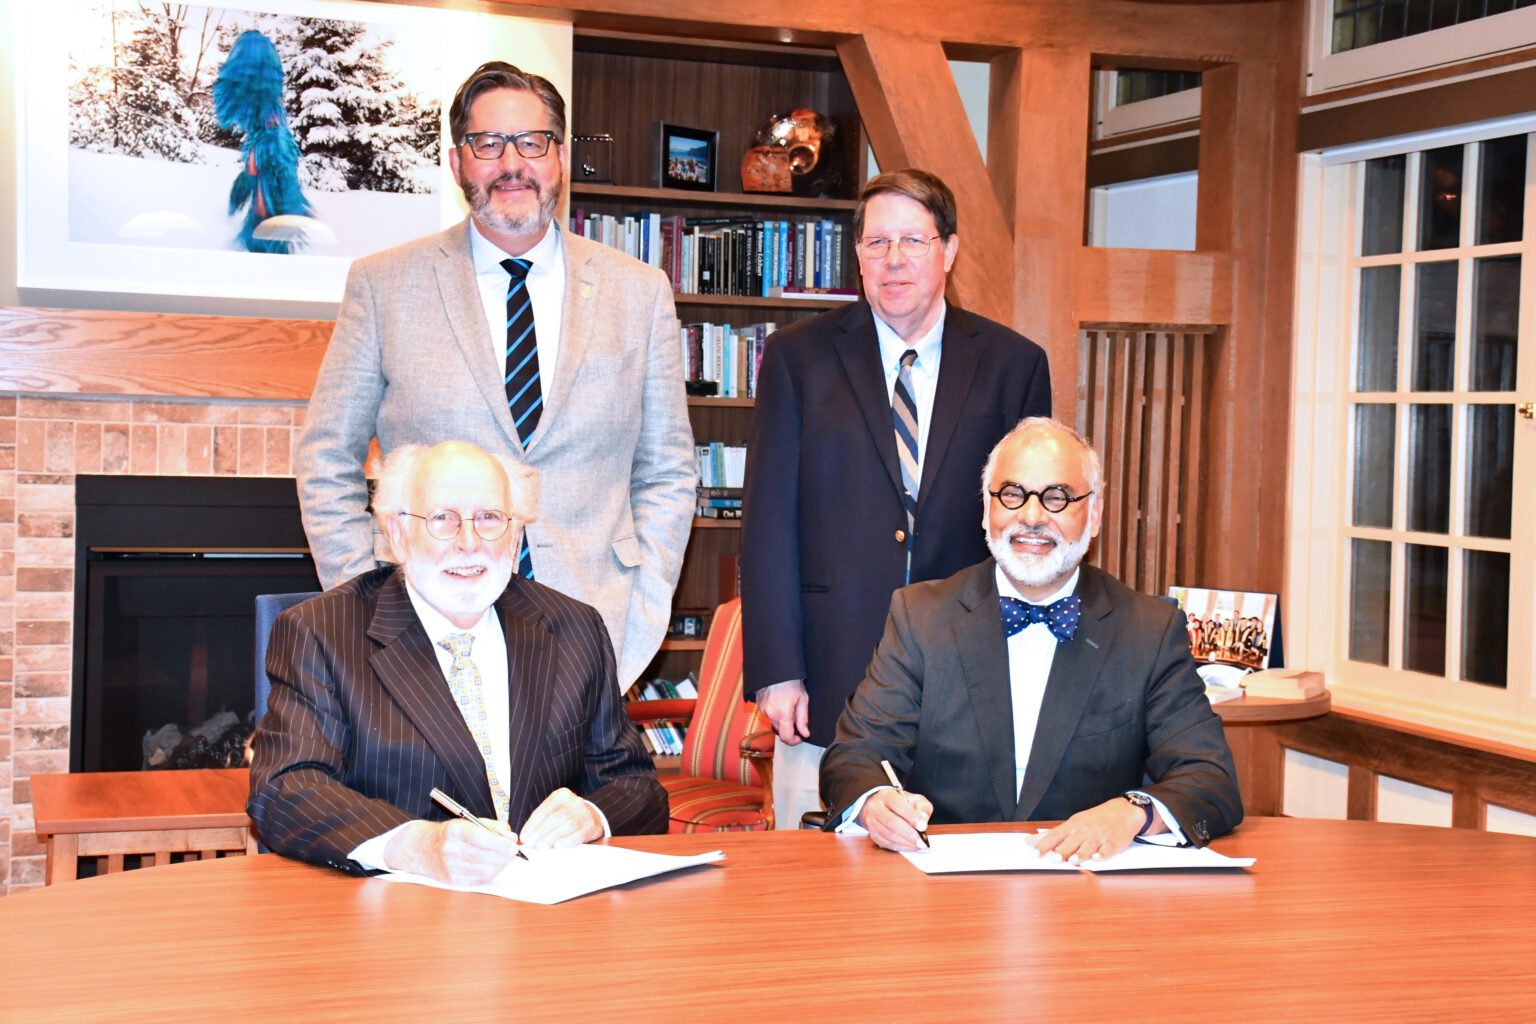 top row (L-R): David Sylvester, President, University of St. Michael’s College. // Thomas Worcester, President, Regis College  bottom row (L-R):  Peter Warrian, Chair, Regis College Governing Council  // Paul Harris, Chair, University of St. Michael’s College Collegium